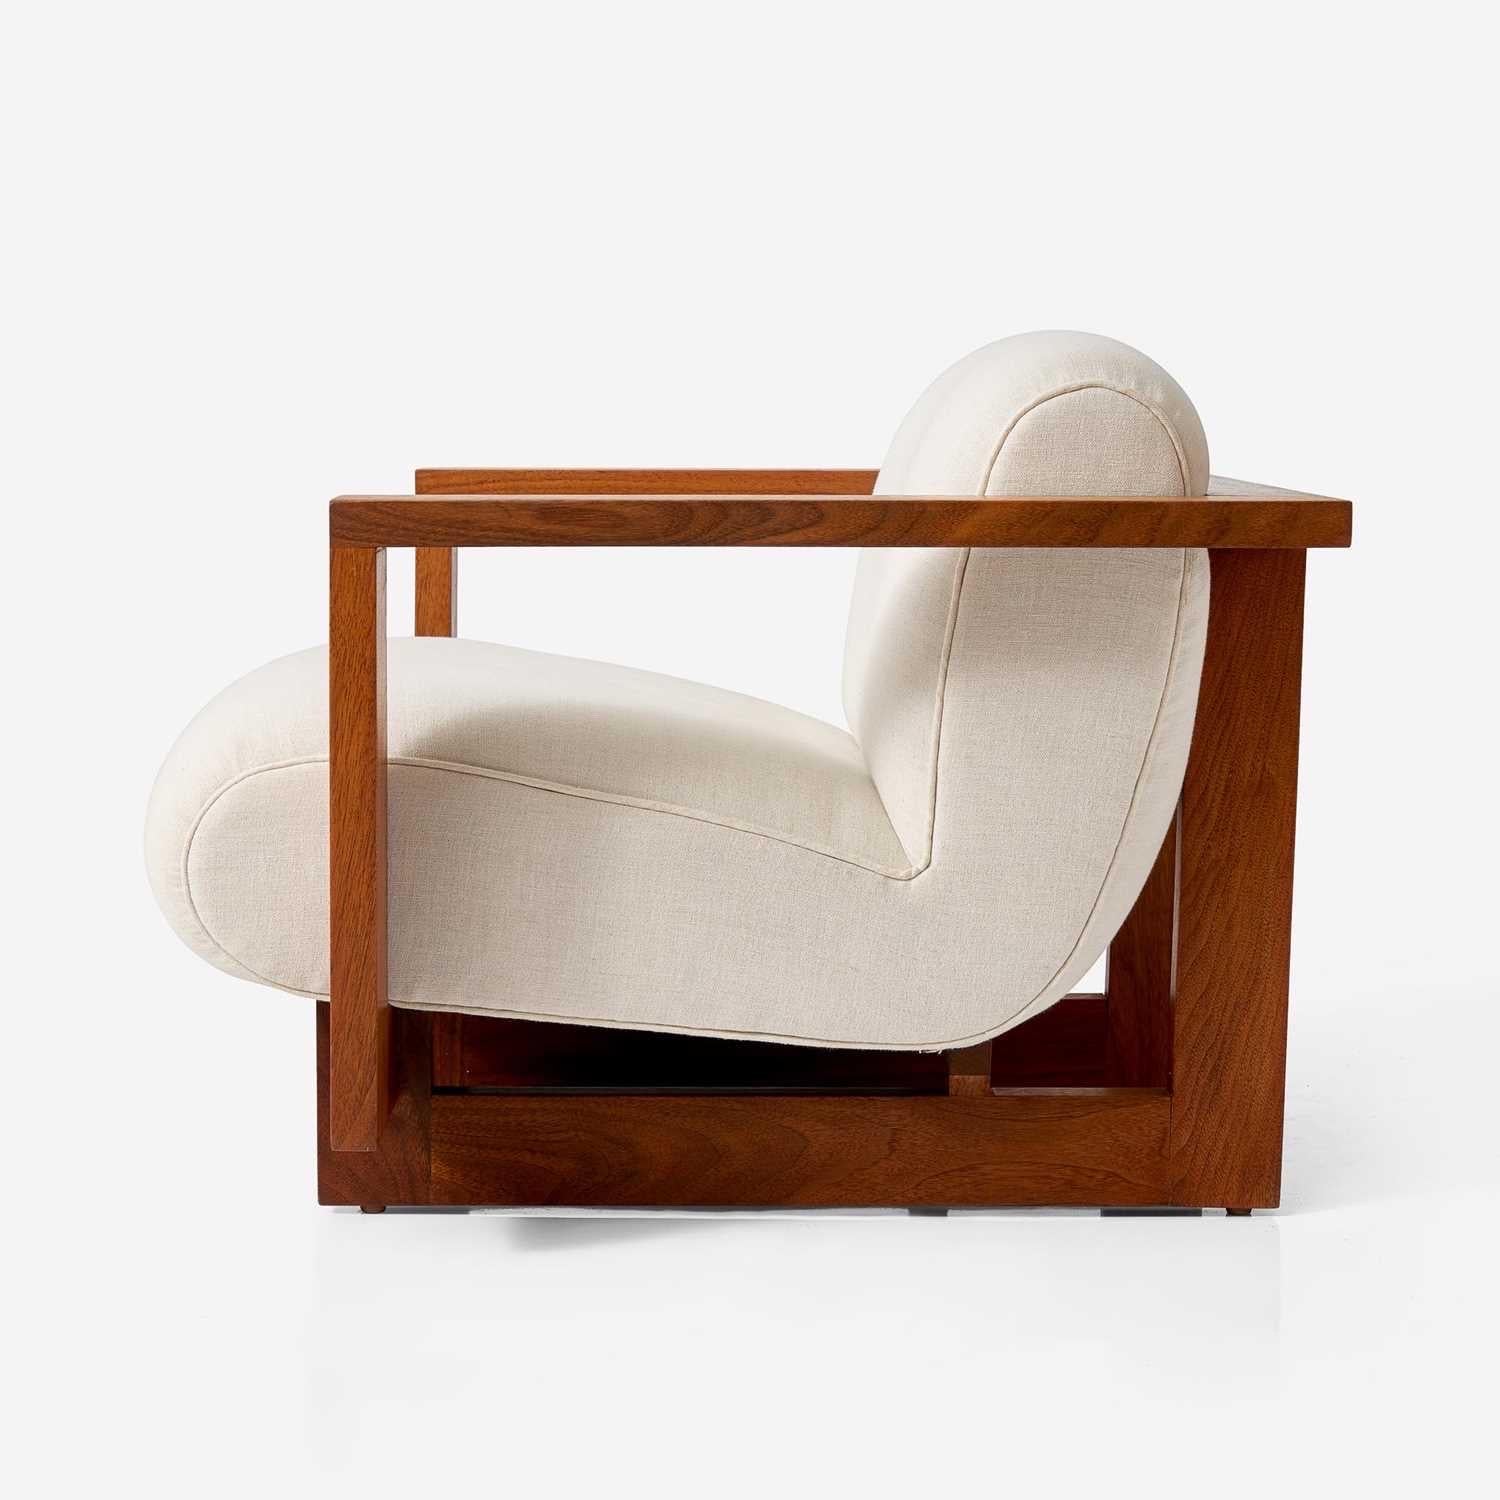 A wonderful child's cubist club chair that was commissioned by Angelina Jolie as a gift for her children, reflecting Brad Pitt's interest in contemporary American design. Sophisticated and playful constructed of walnut and fabric